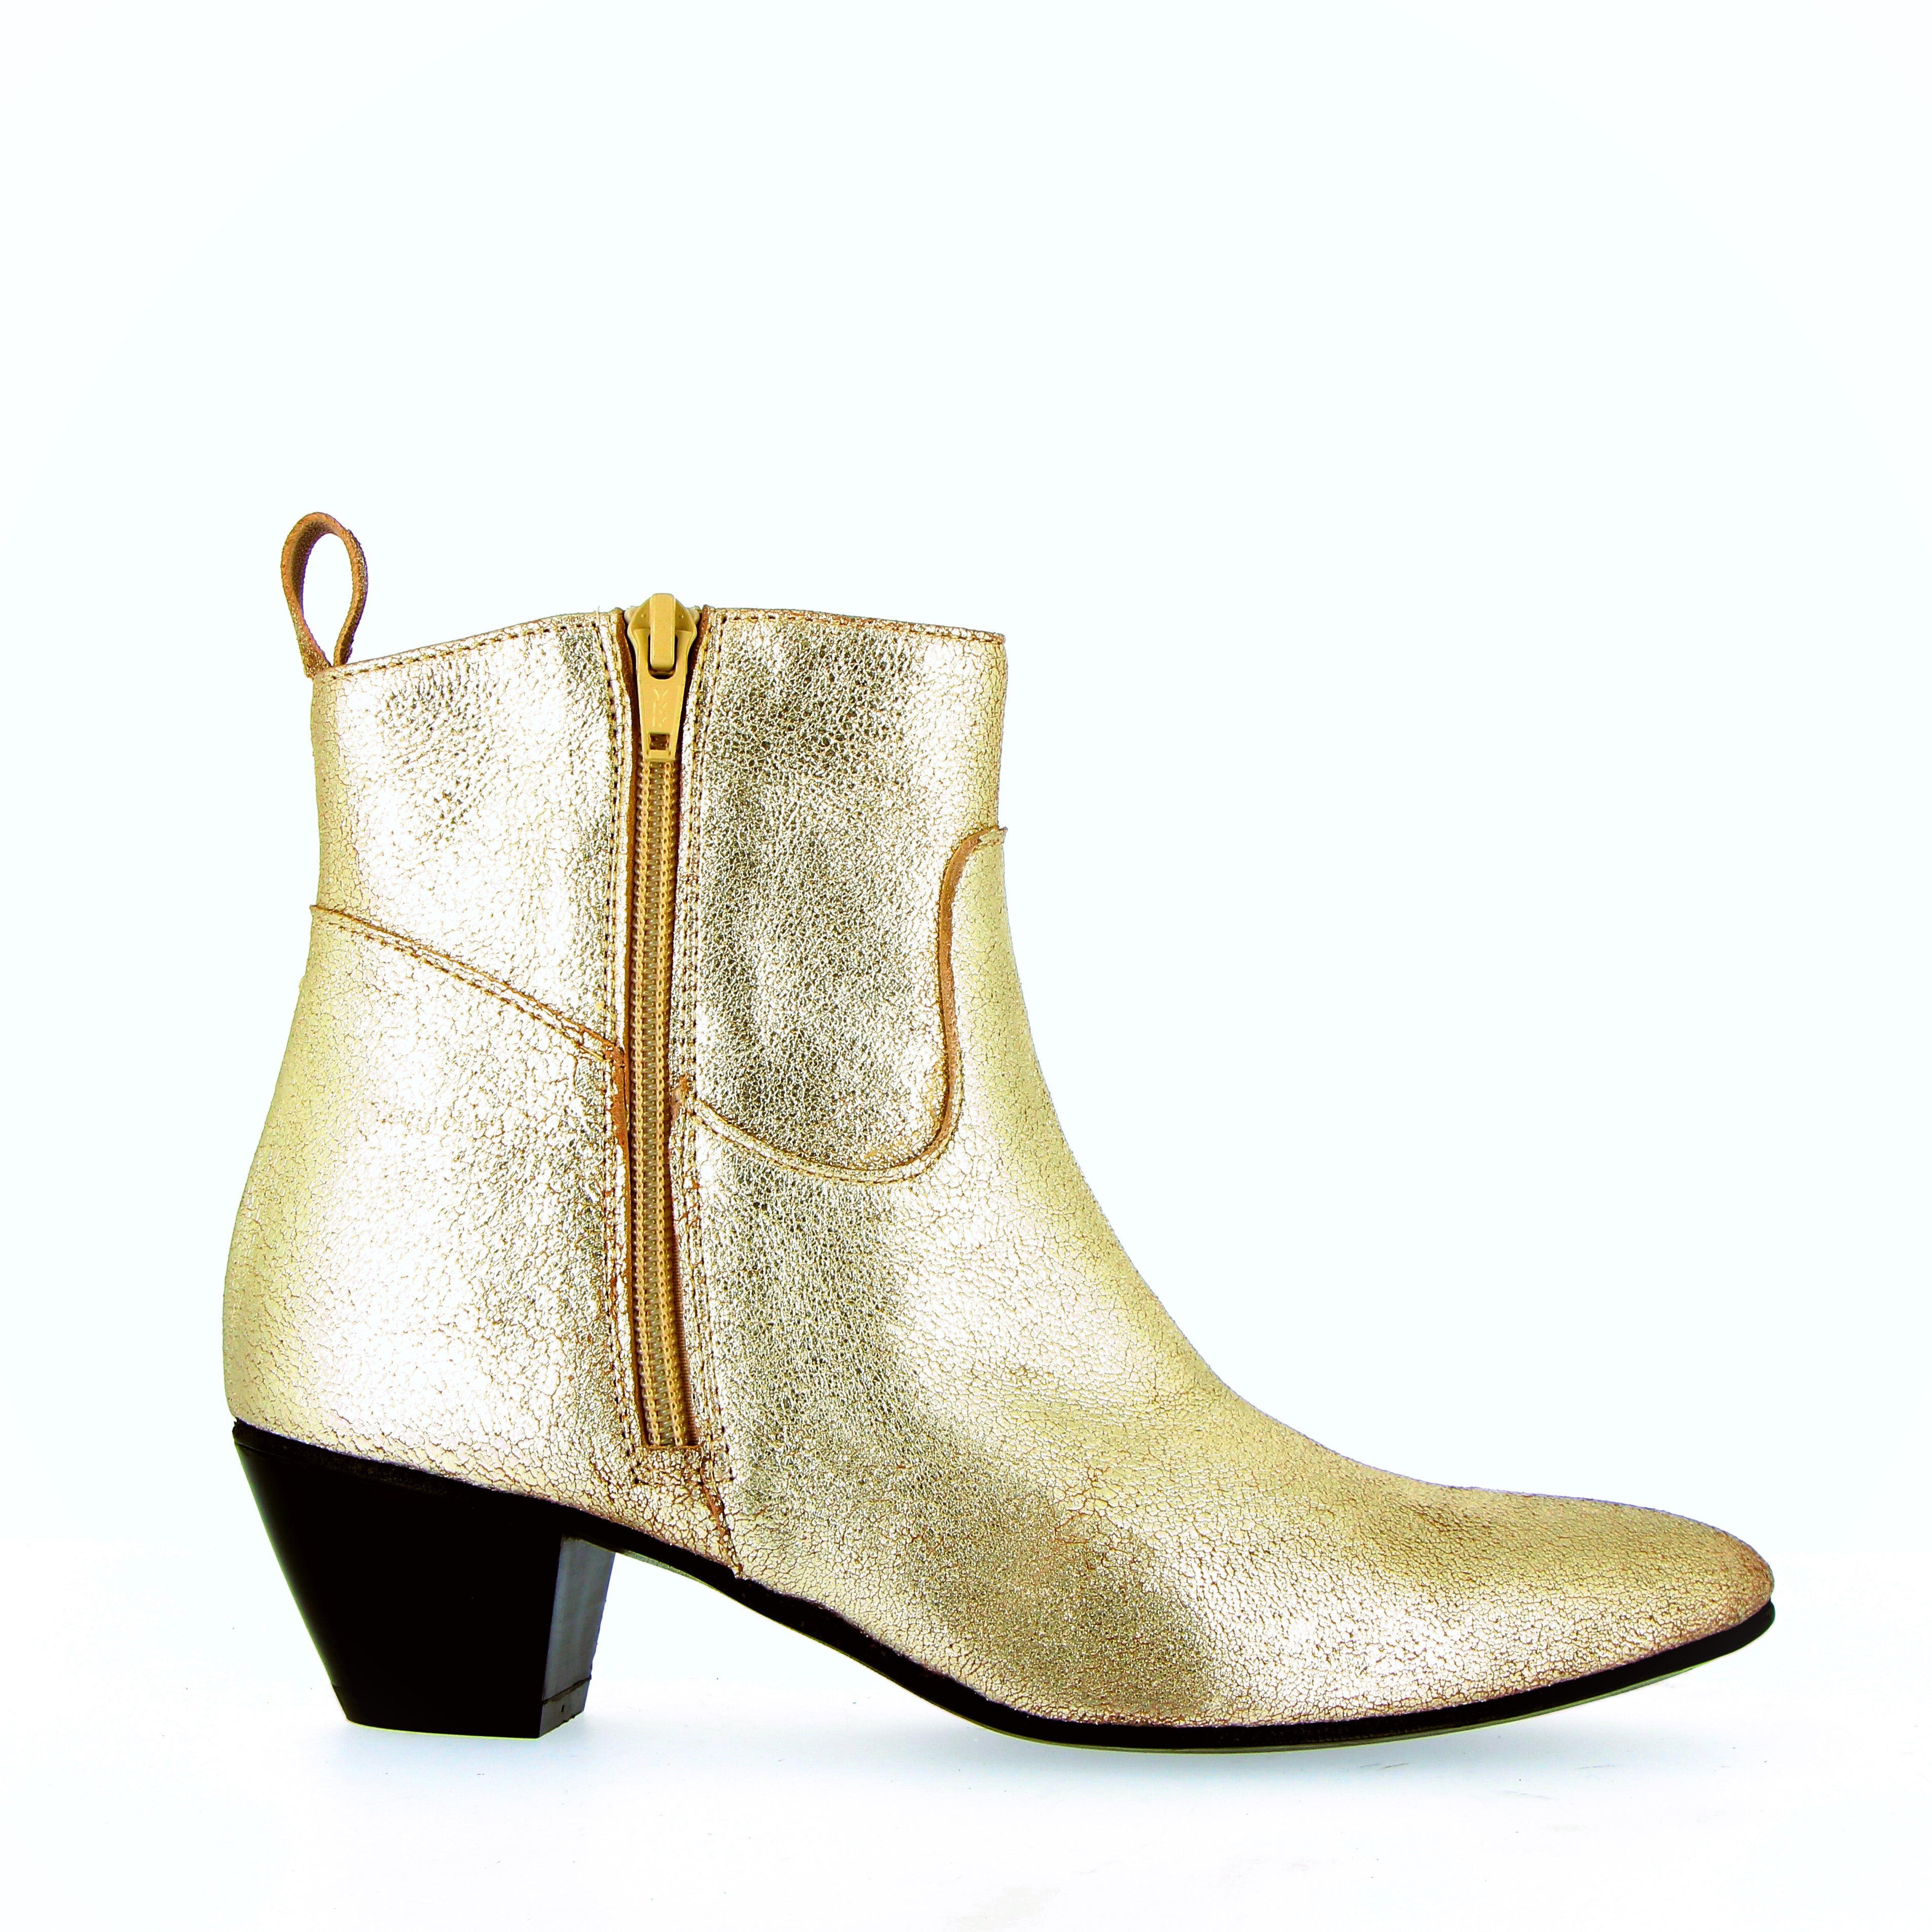 Ankle boot in soft shabby leather (platinum silver) with double zip